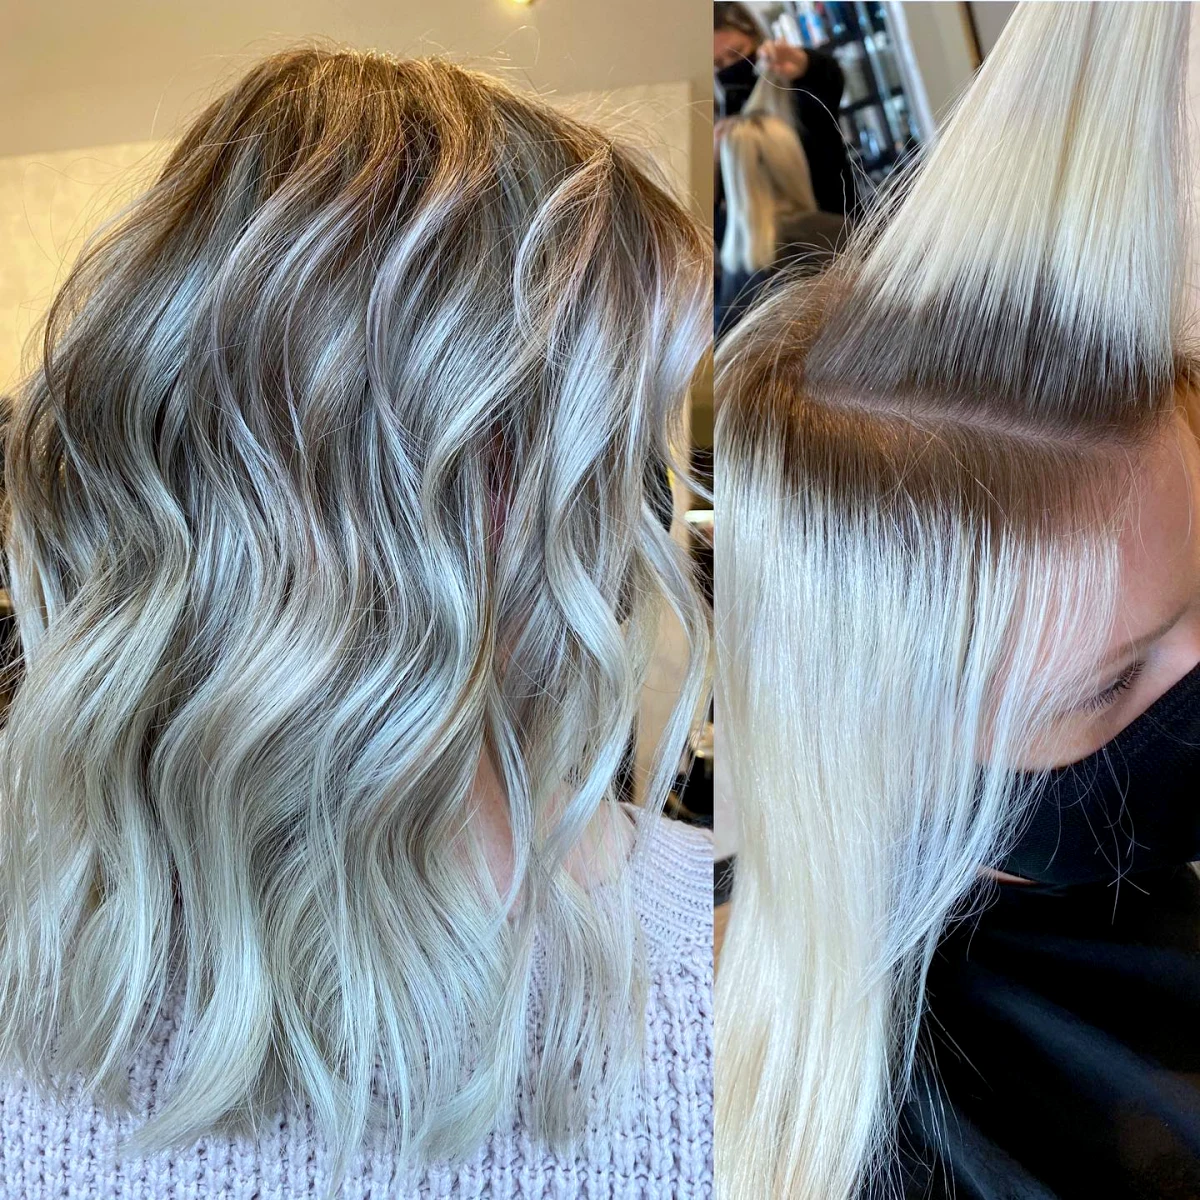 1706118668 490 Reverse balayage in before and after photos A technique for.webp - Reverse balayage in before and after photos!  A technique for a natural and low maintenance result